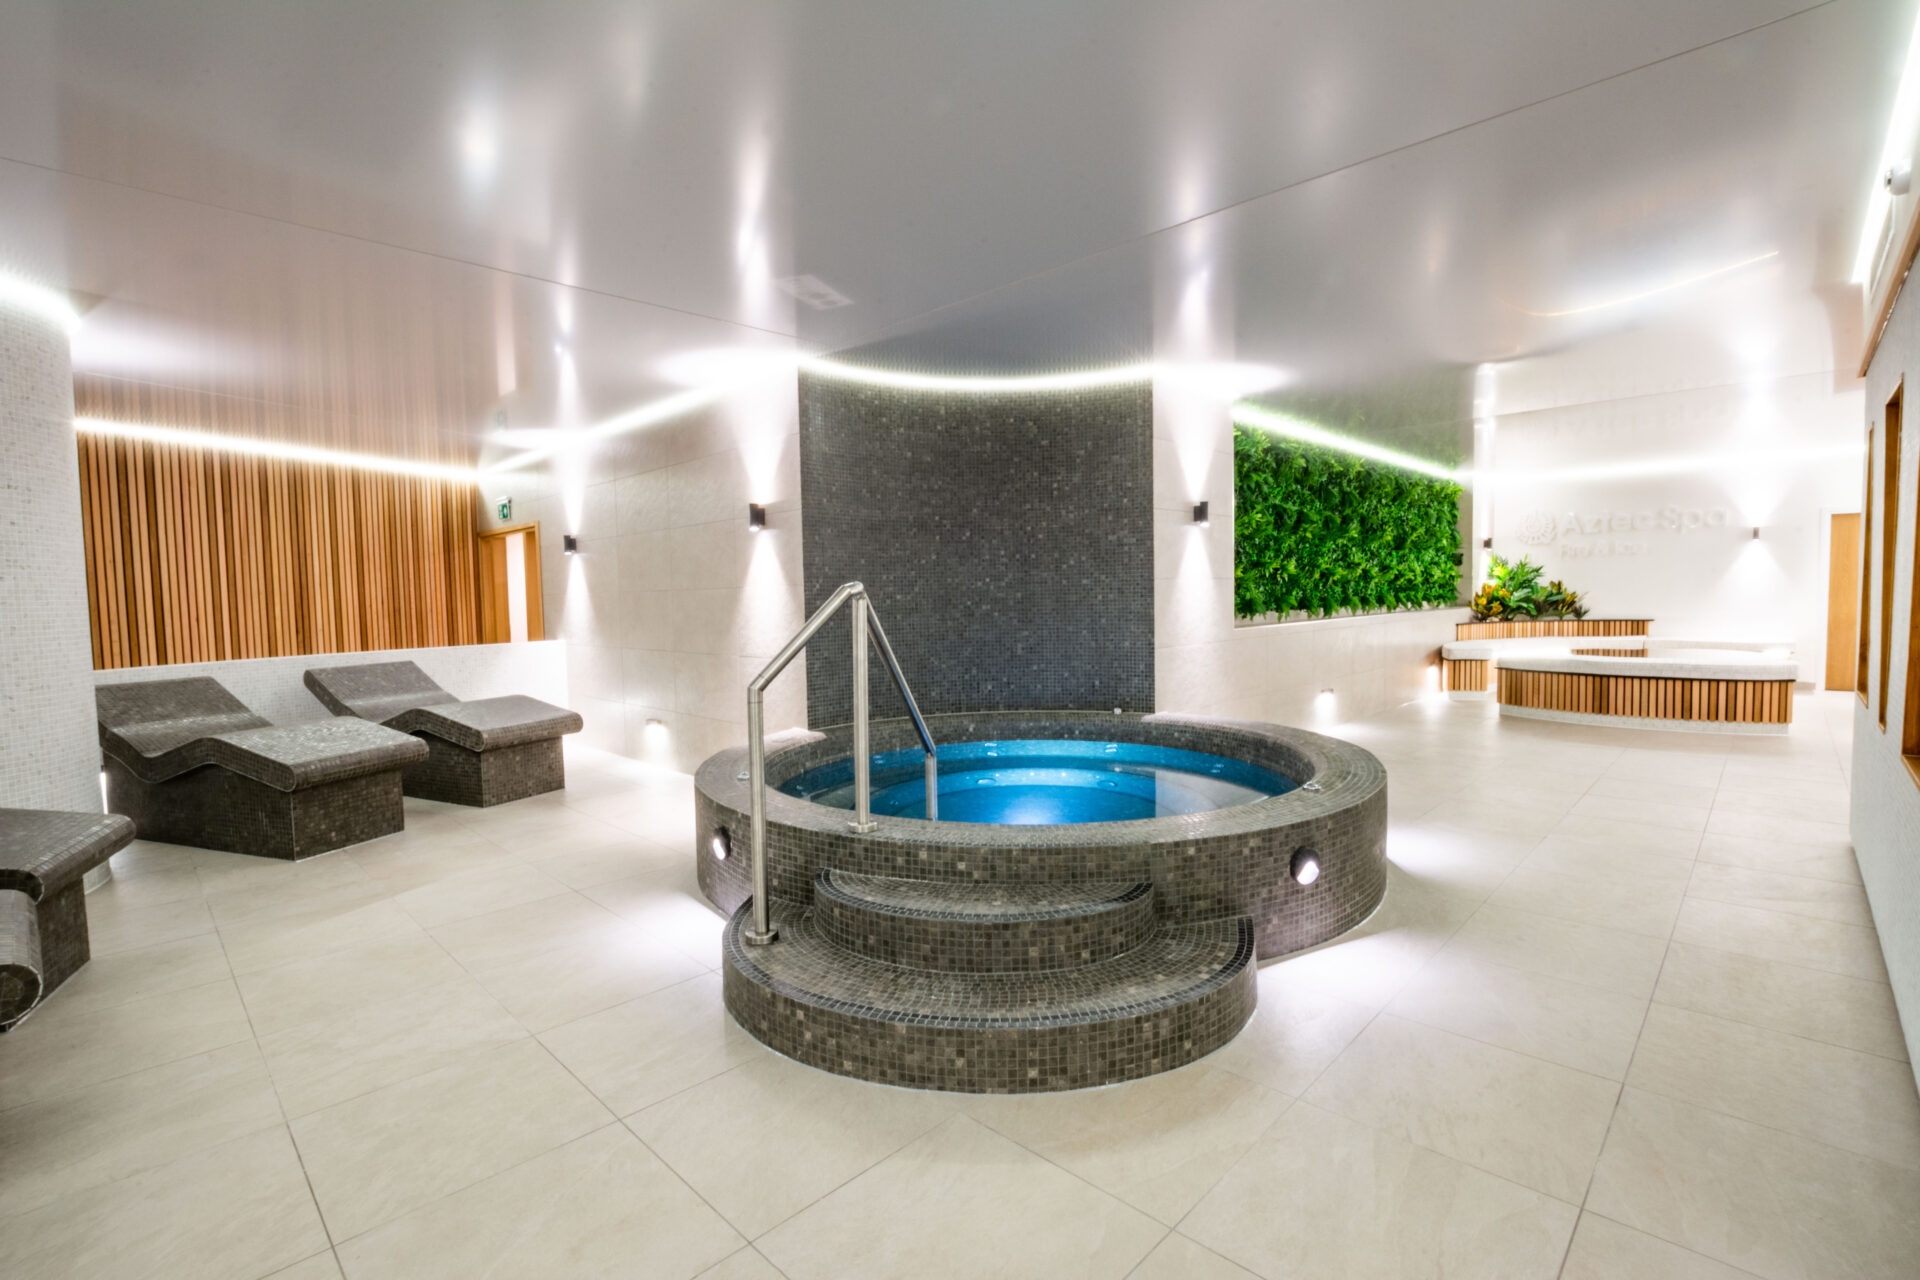 Multi-Million Pound Vision Culminates with Completion of Aztec Spa Fire & Ice